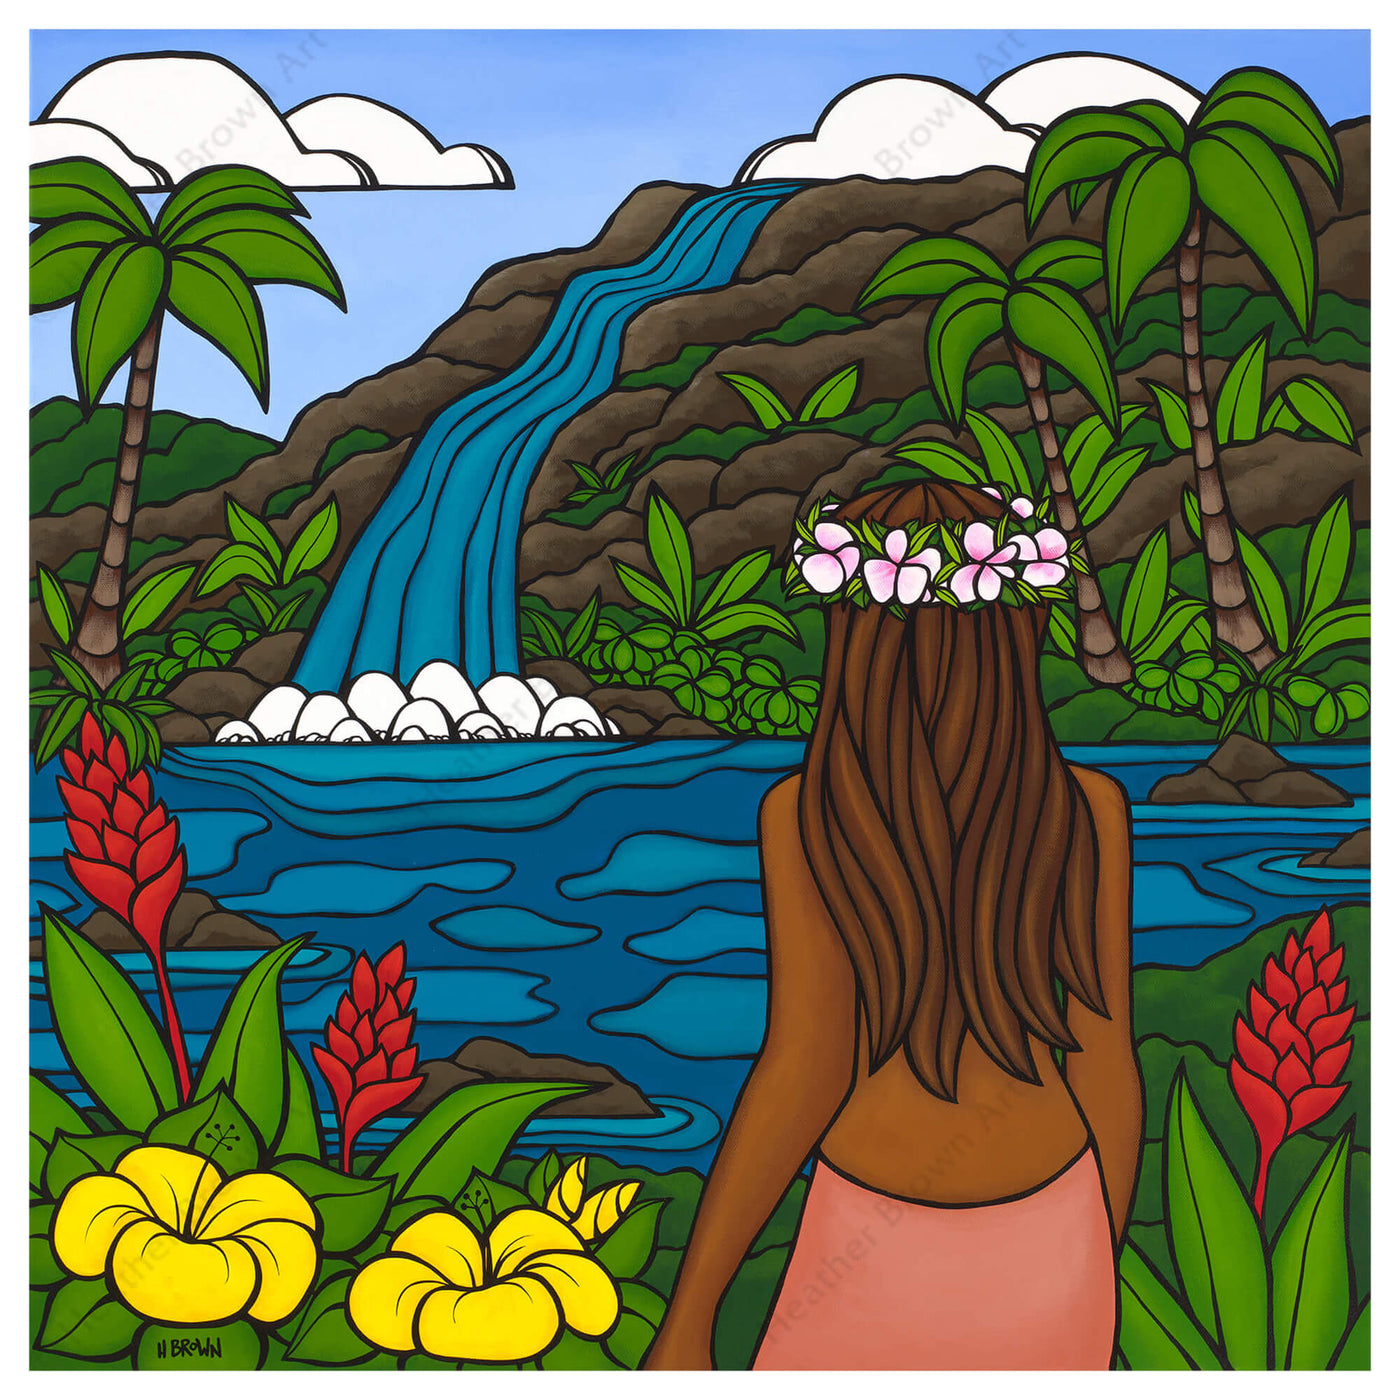 A matted art print of a local woman enjoying the waterfall view with colorful tropical flowers surrounding her by Hawaii surf artist Heather Brown